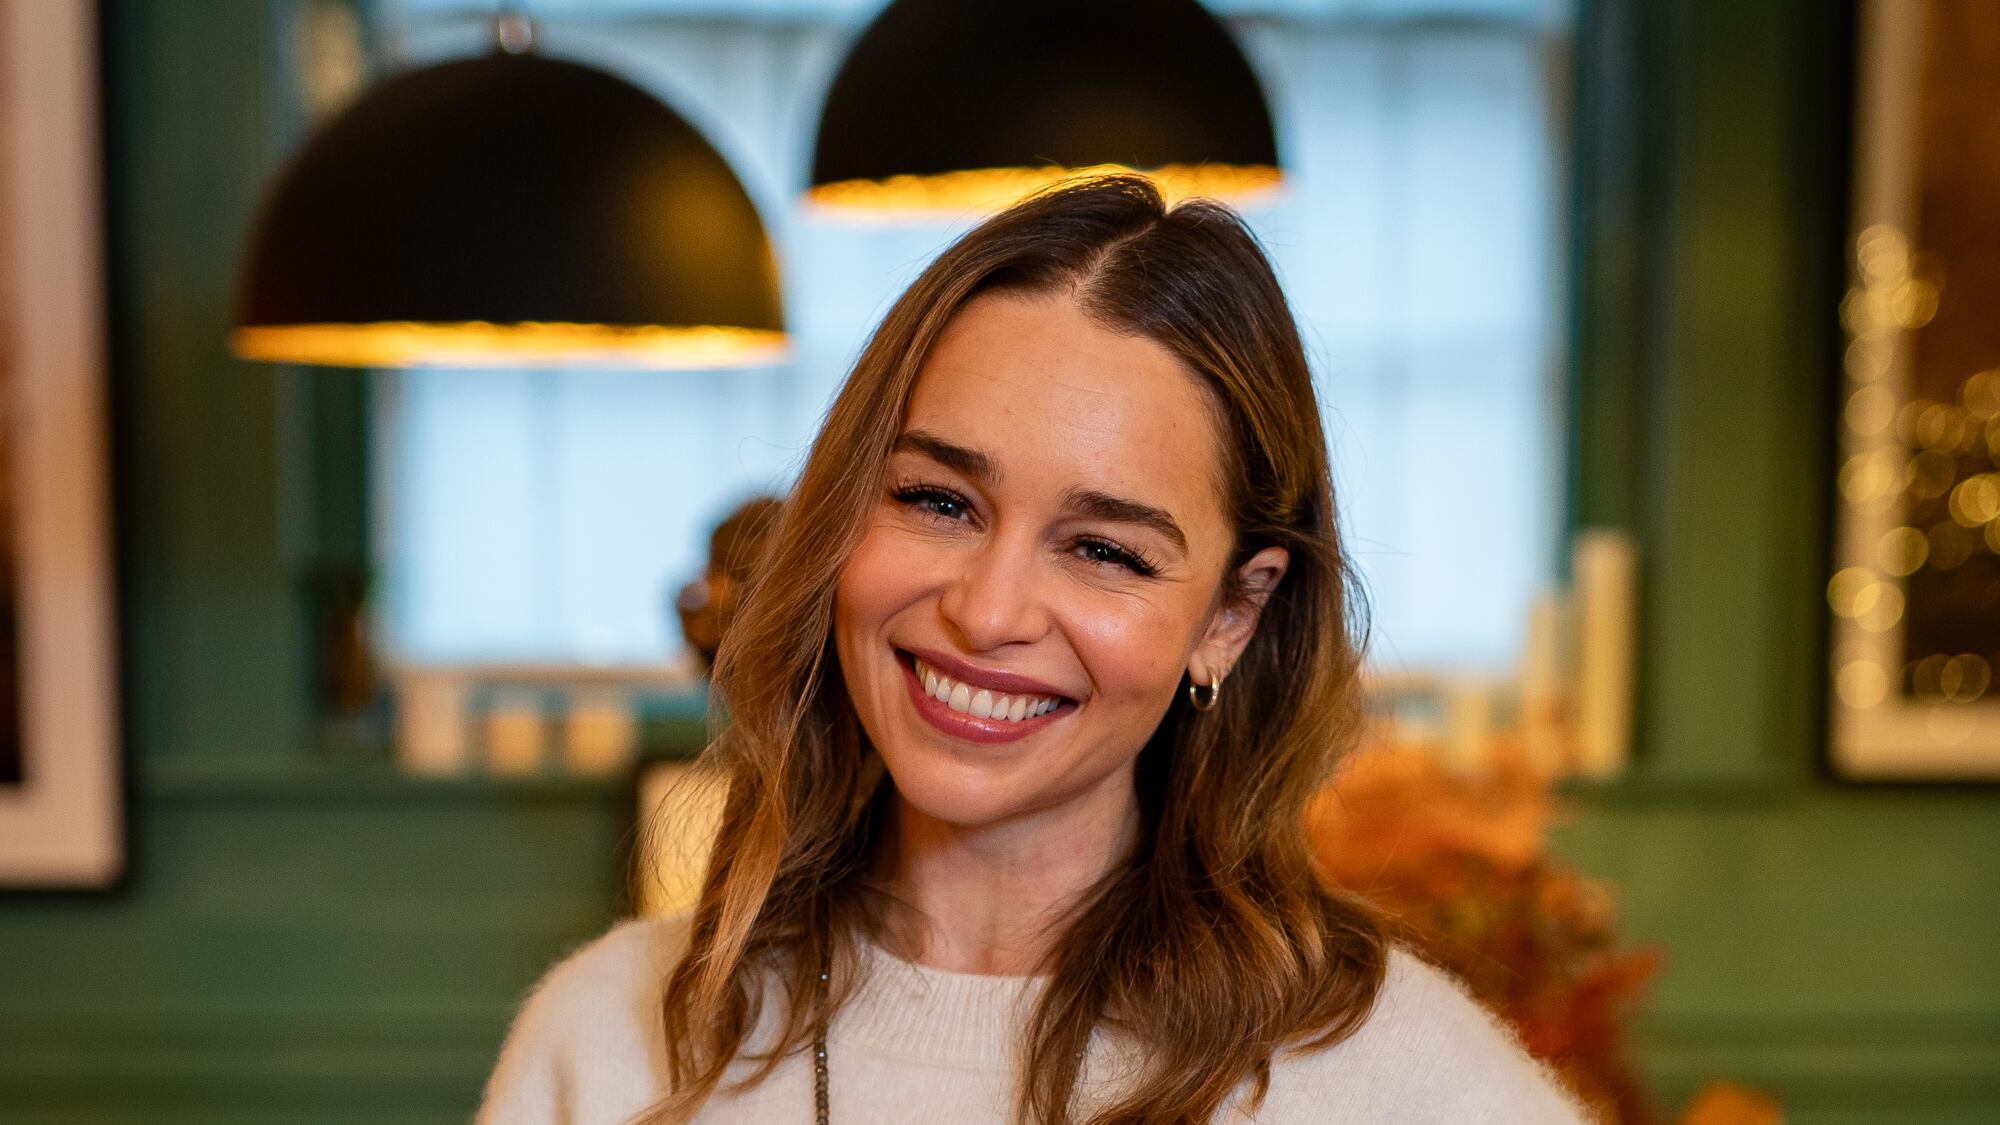 Emilia Clarke has described how she thought she was going to be fired from Game of Thrones after having a brain injury